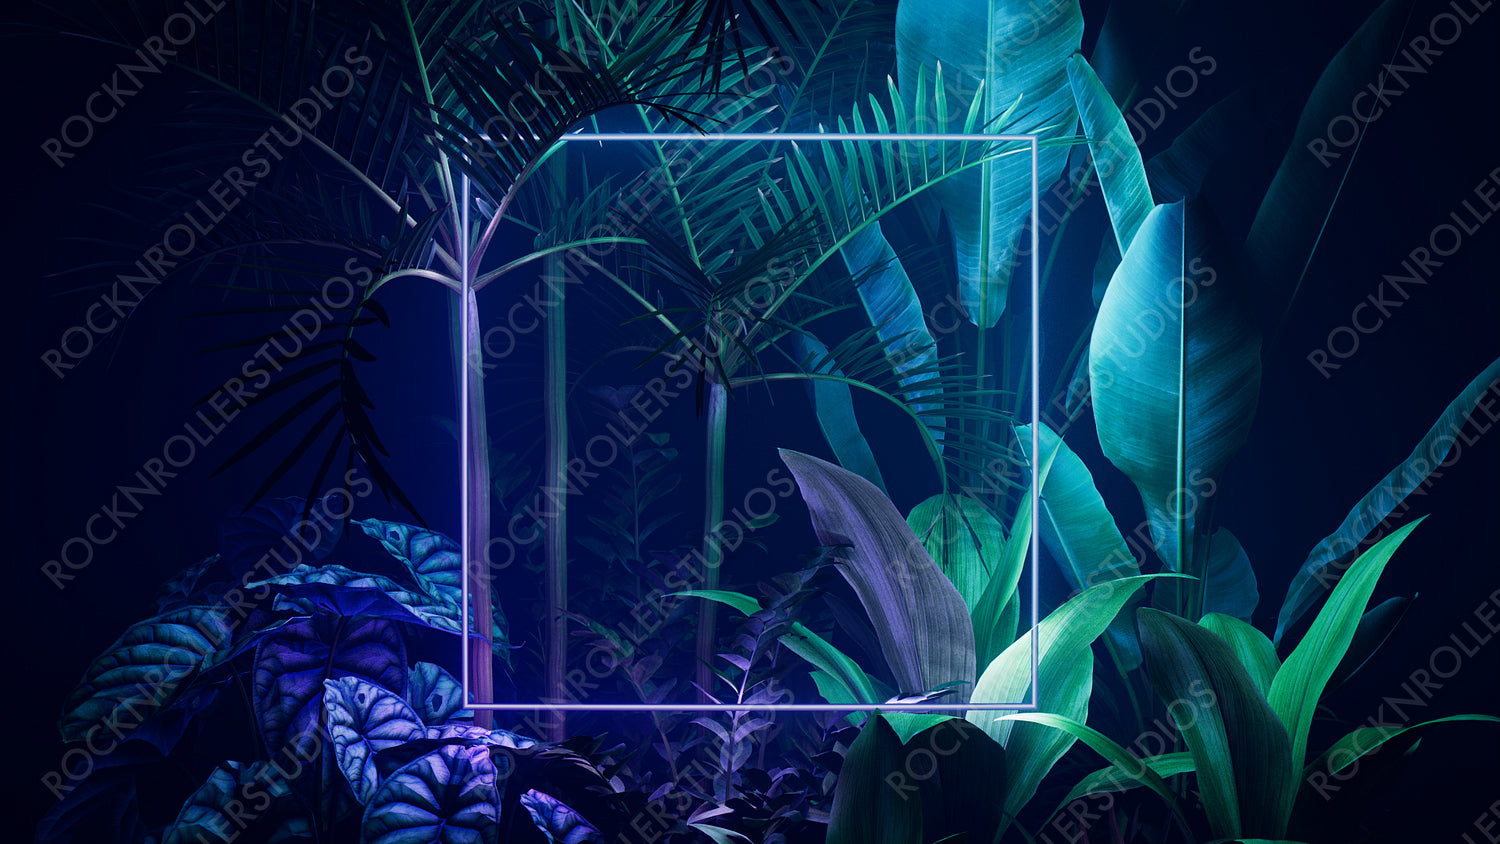 Cyberpunk Background Design. Tropical Plants with Purple and Green, Square shaped Neon Frame.